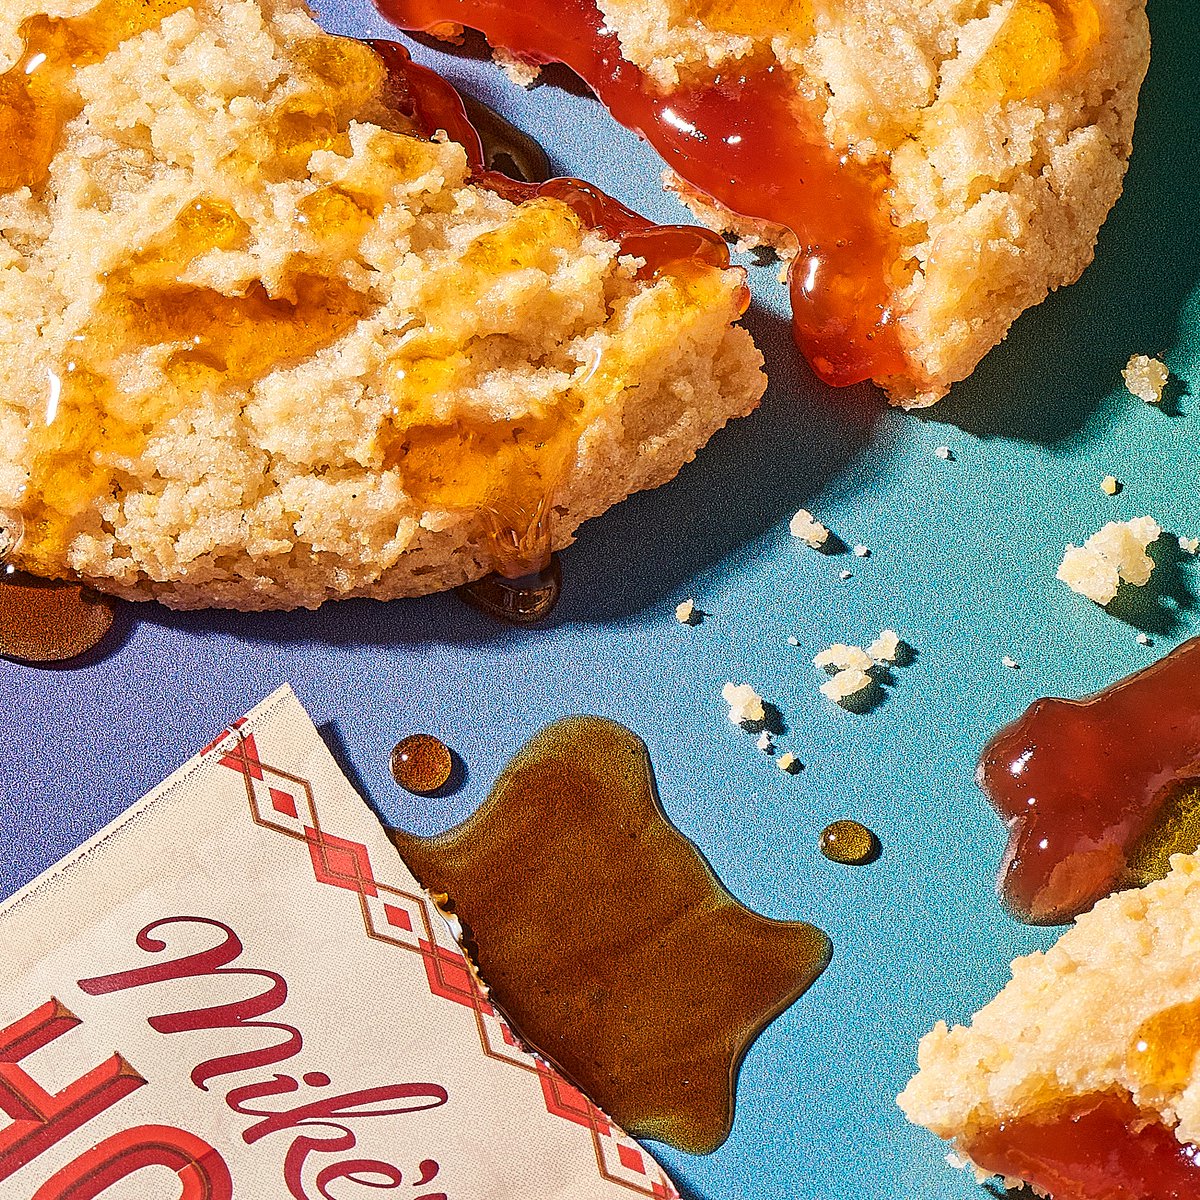 sweet and spicy treat headed your way on 4.9. any guesses?